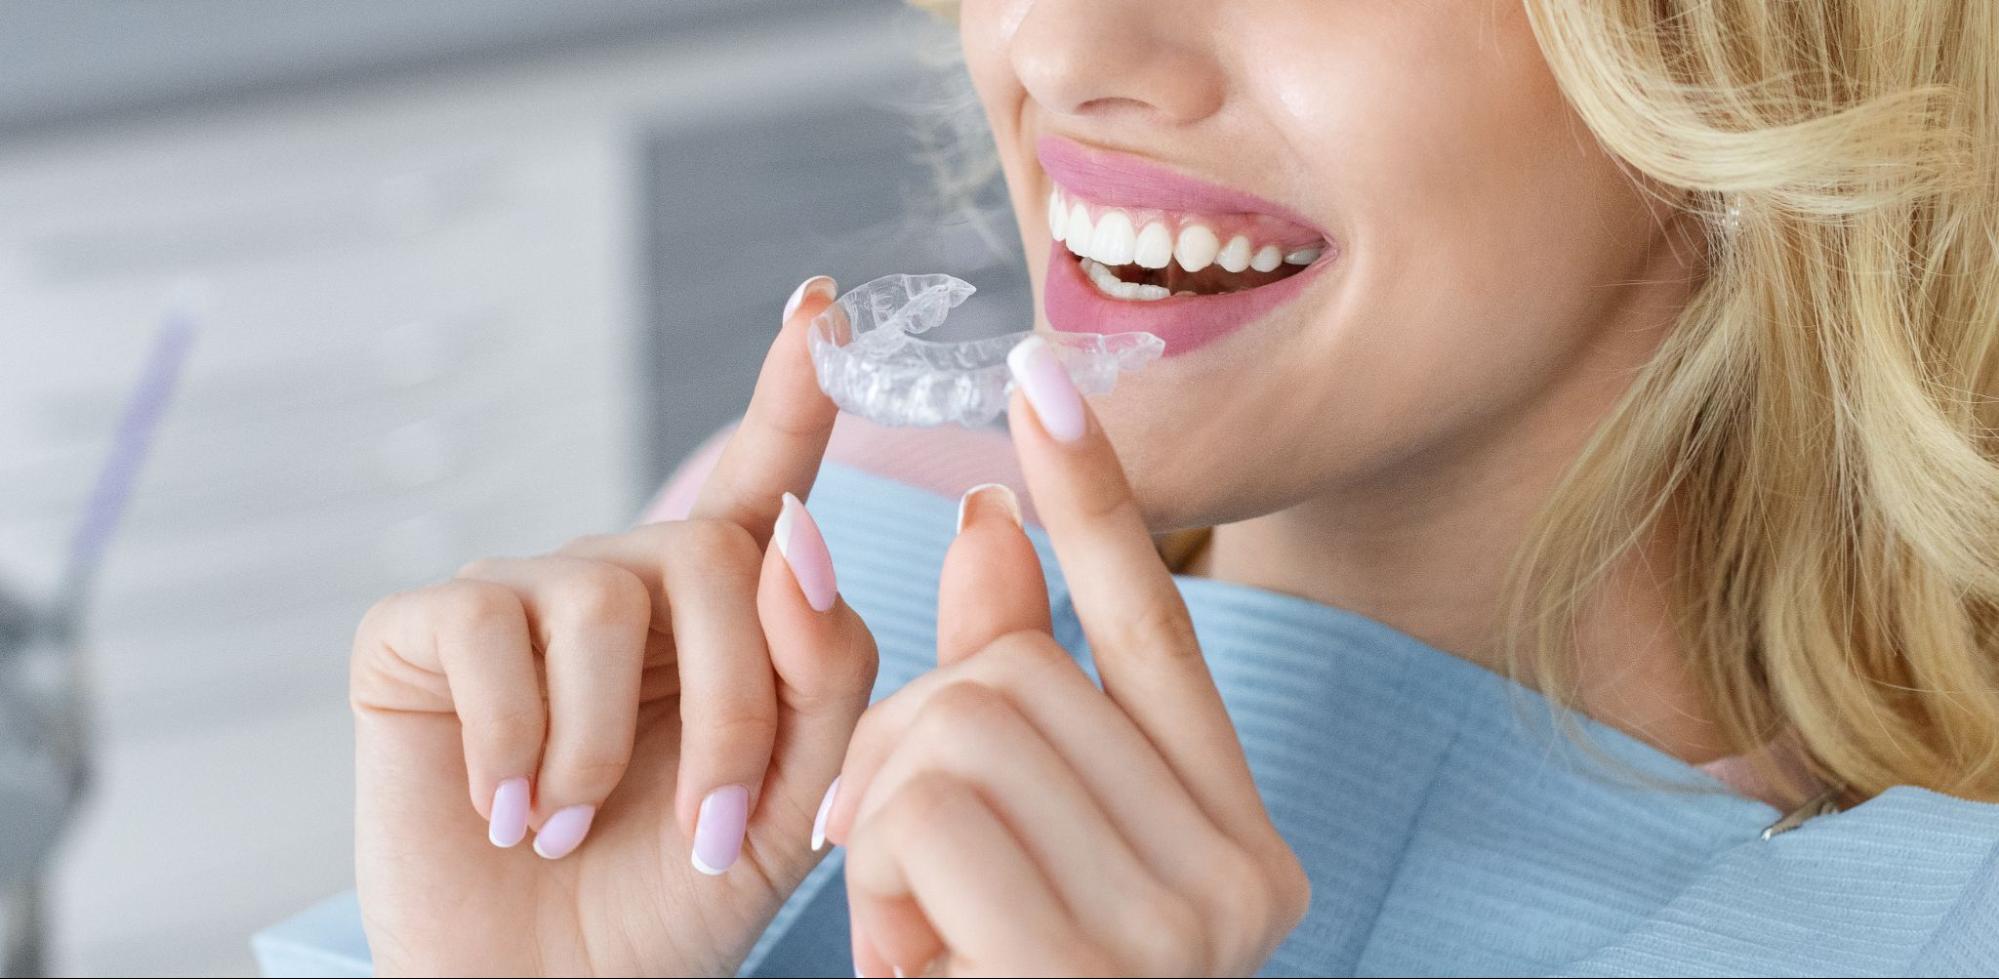 How To Get The Most Out Of Invisalign Treatment